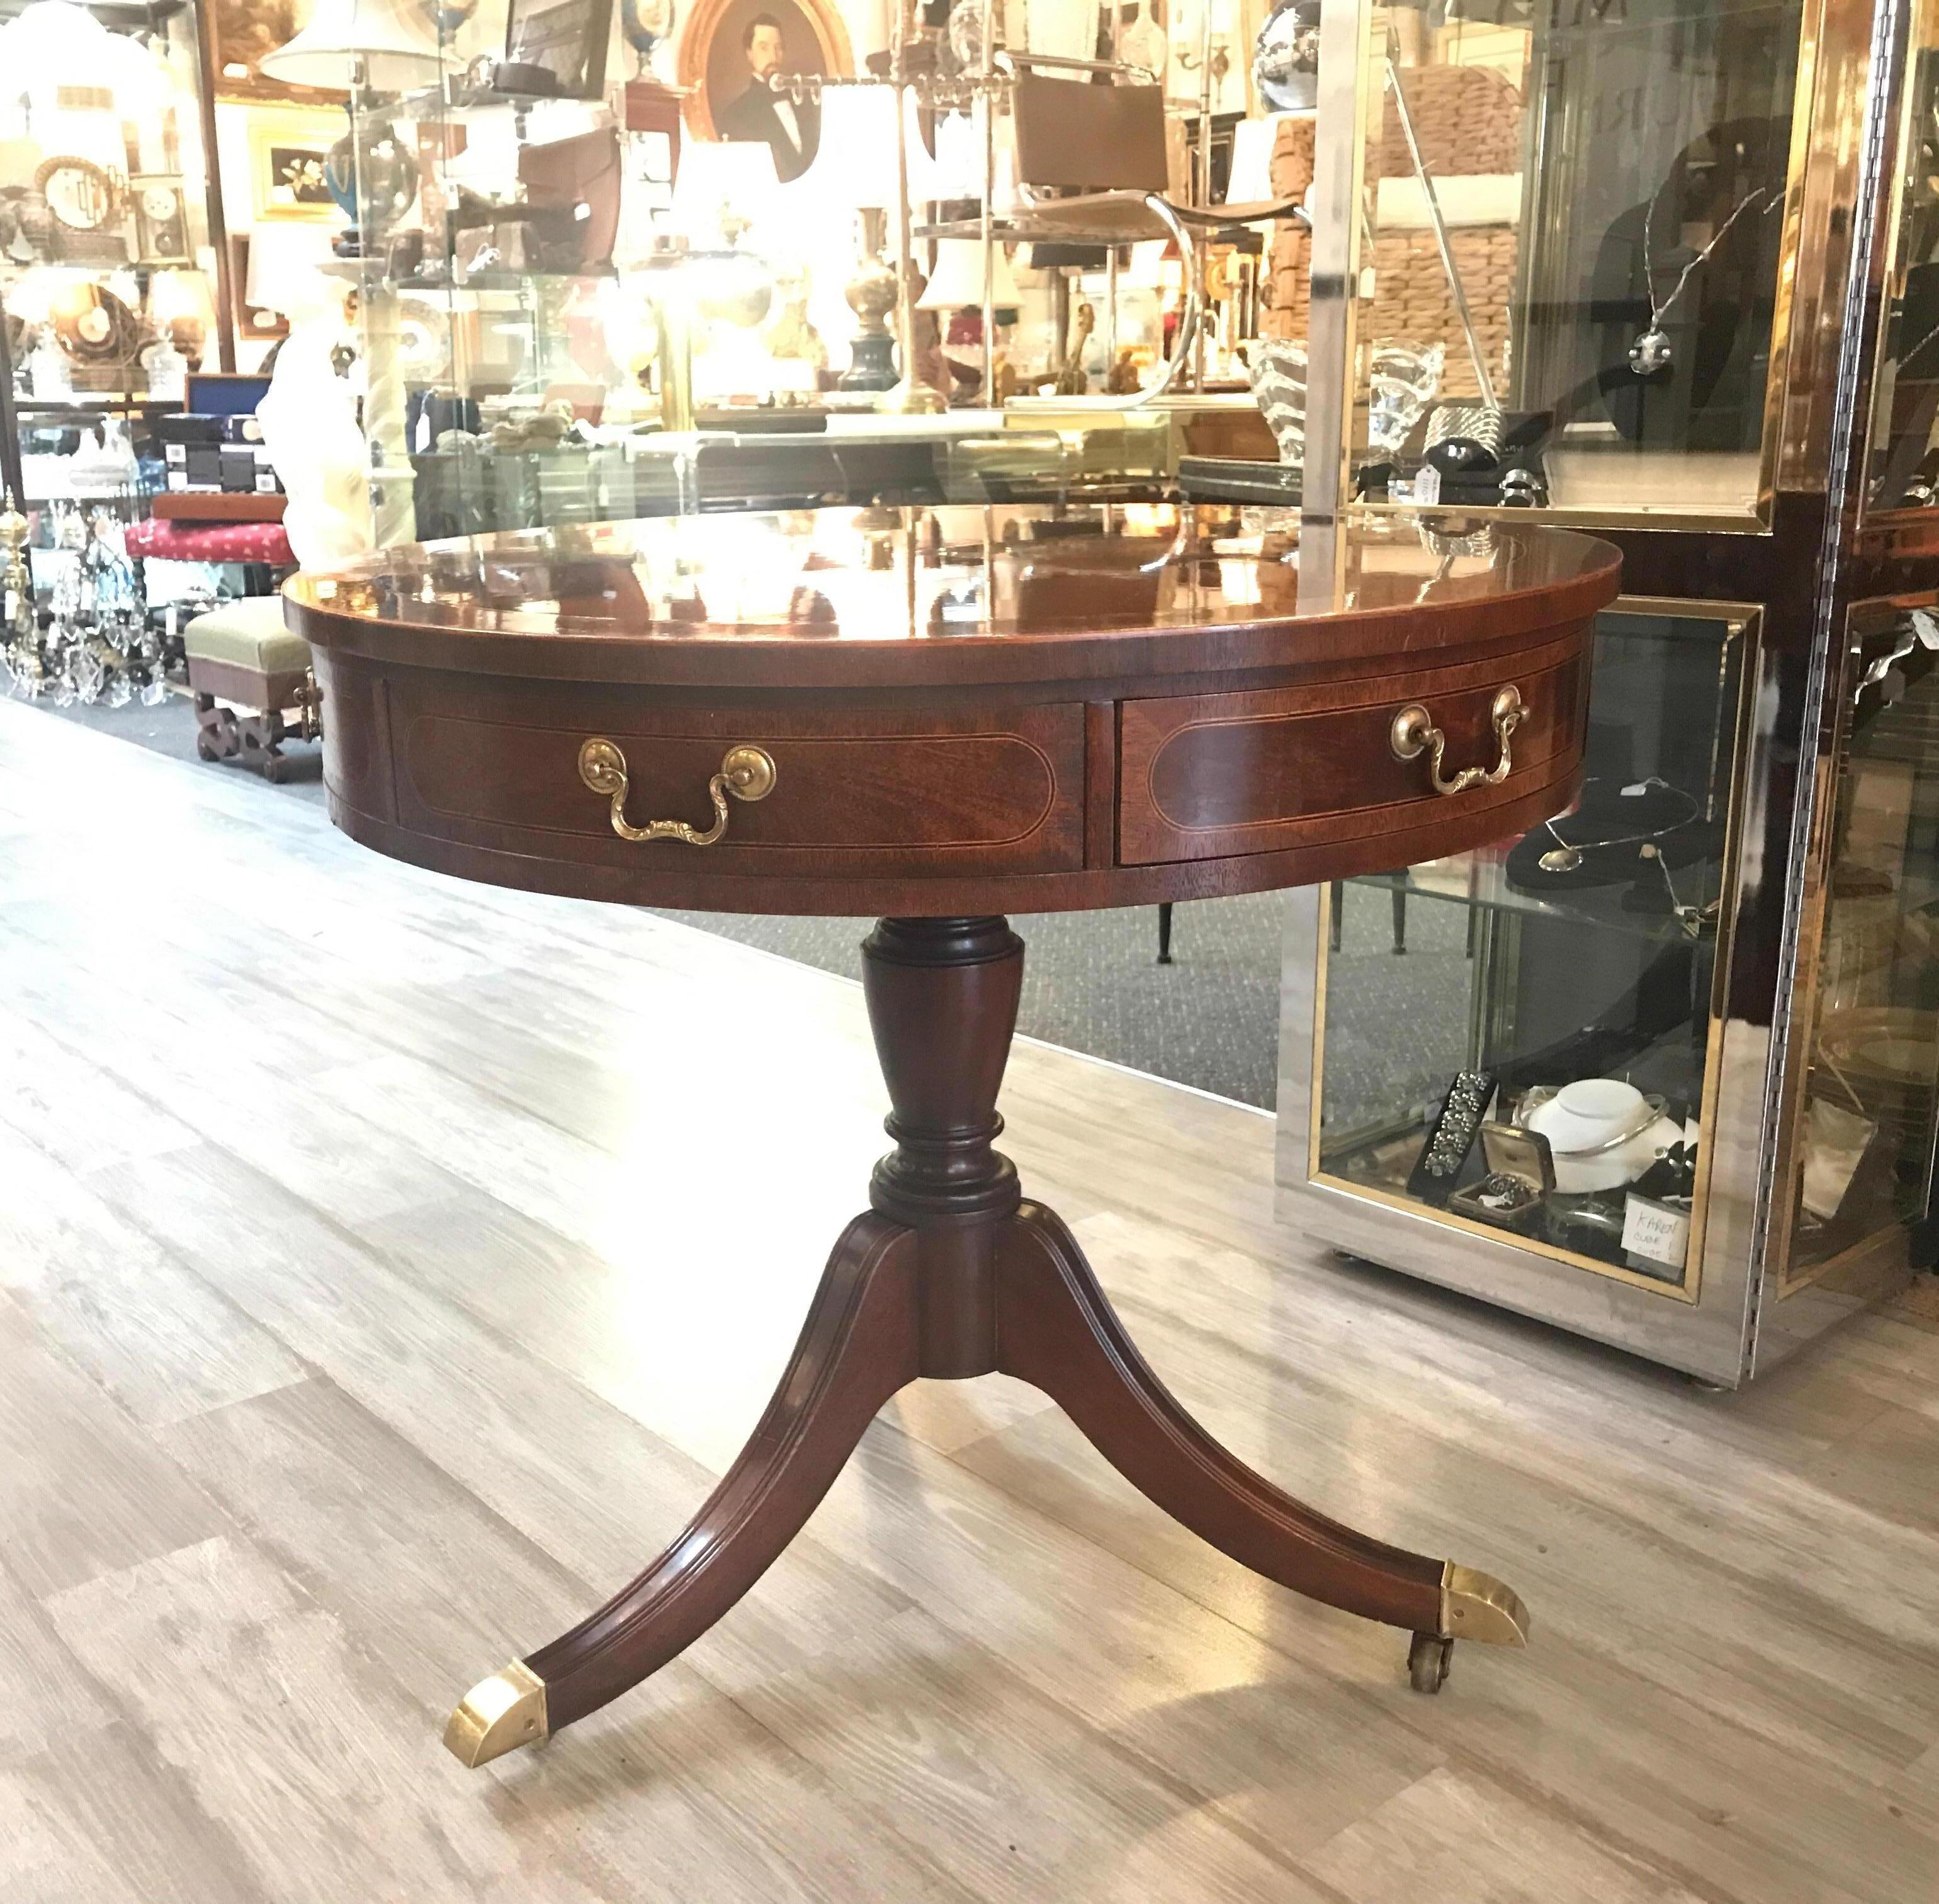 Beautiful Baker quality round mahogany drawered table with banded edge. The flame mahogany top with ewe wood band with drawer fronts all around the apron. Two drawers are working drawers. The top is supported buy a turned central column with triple